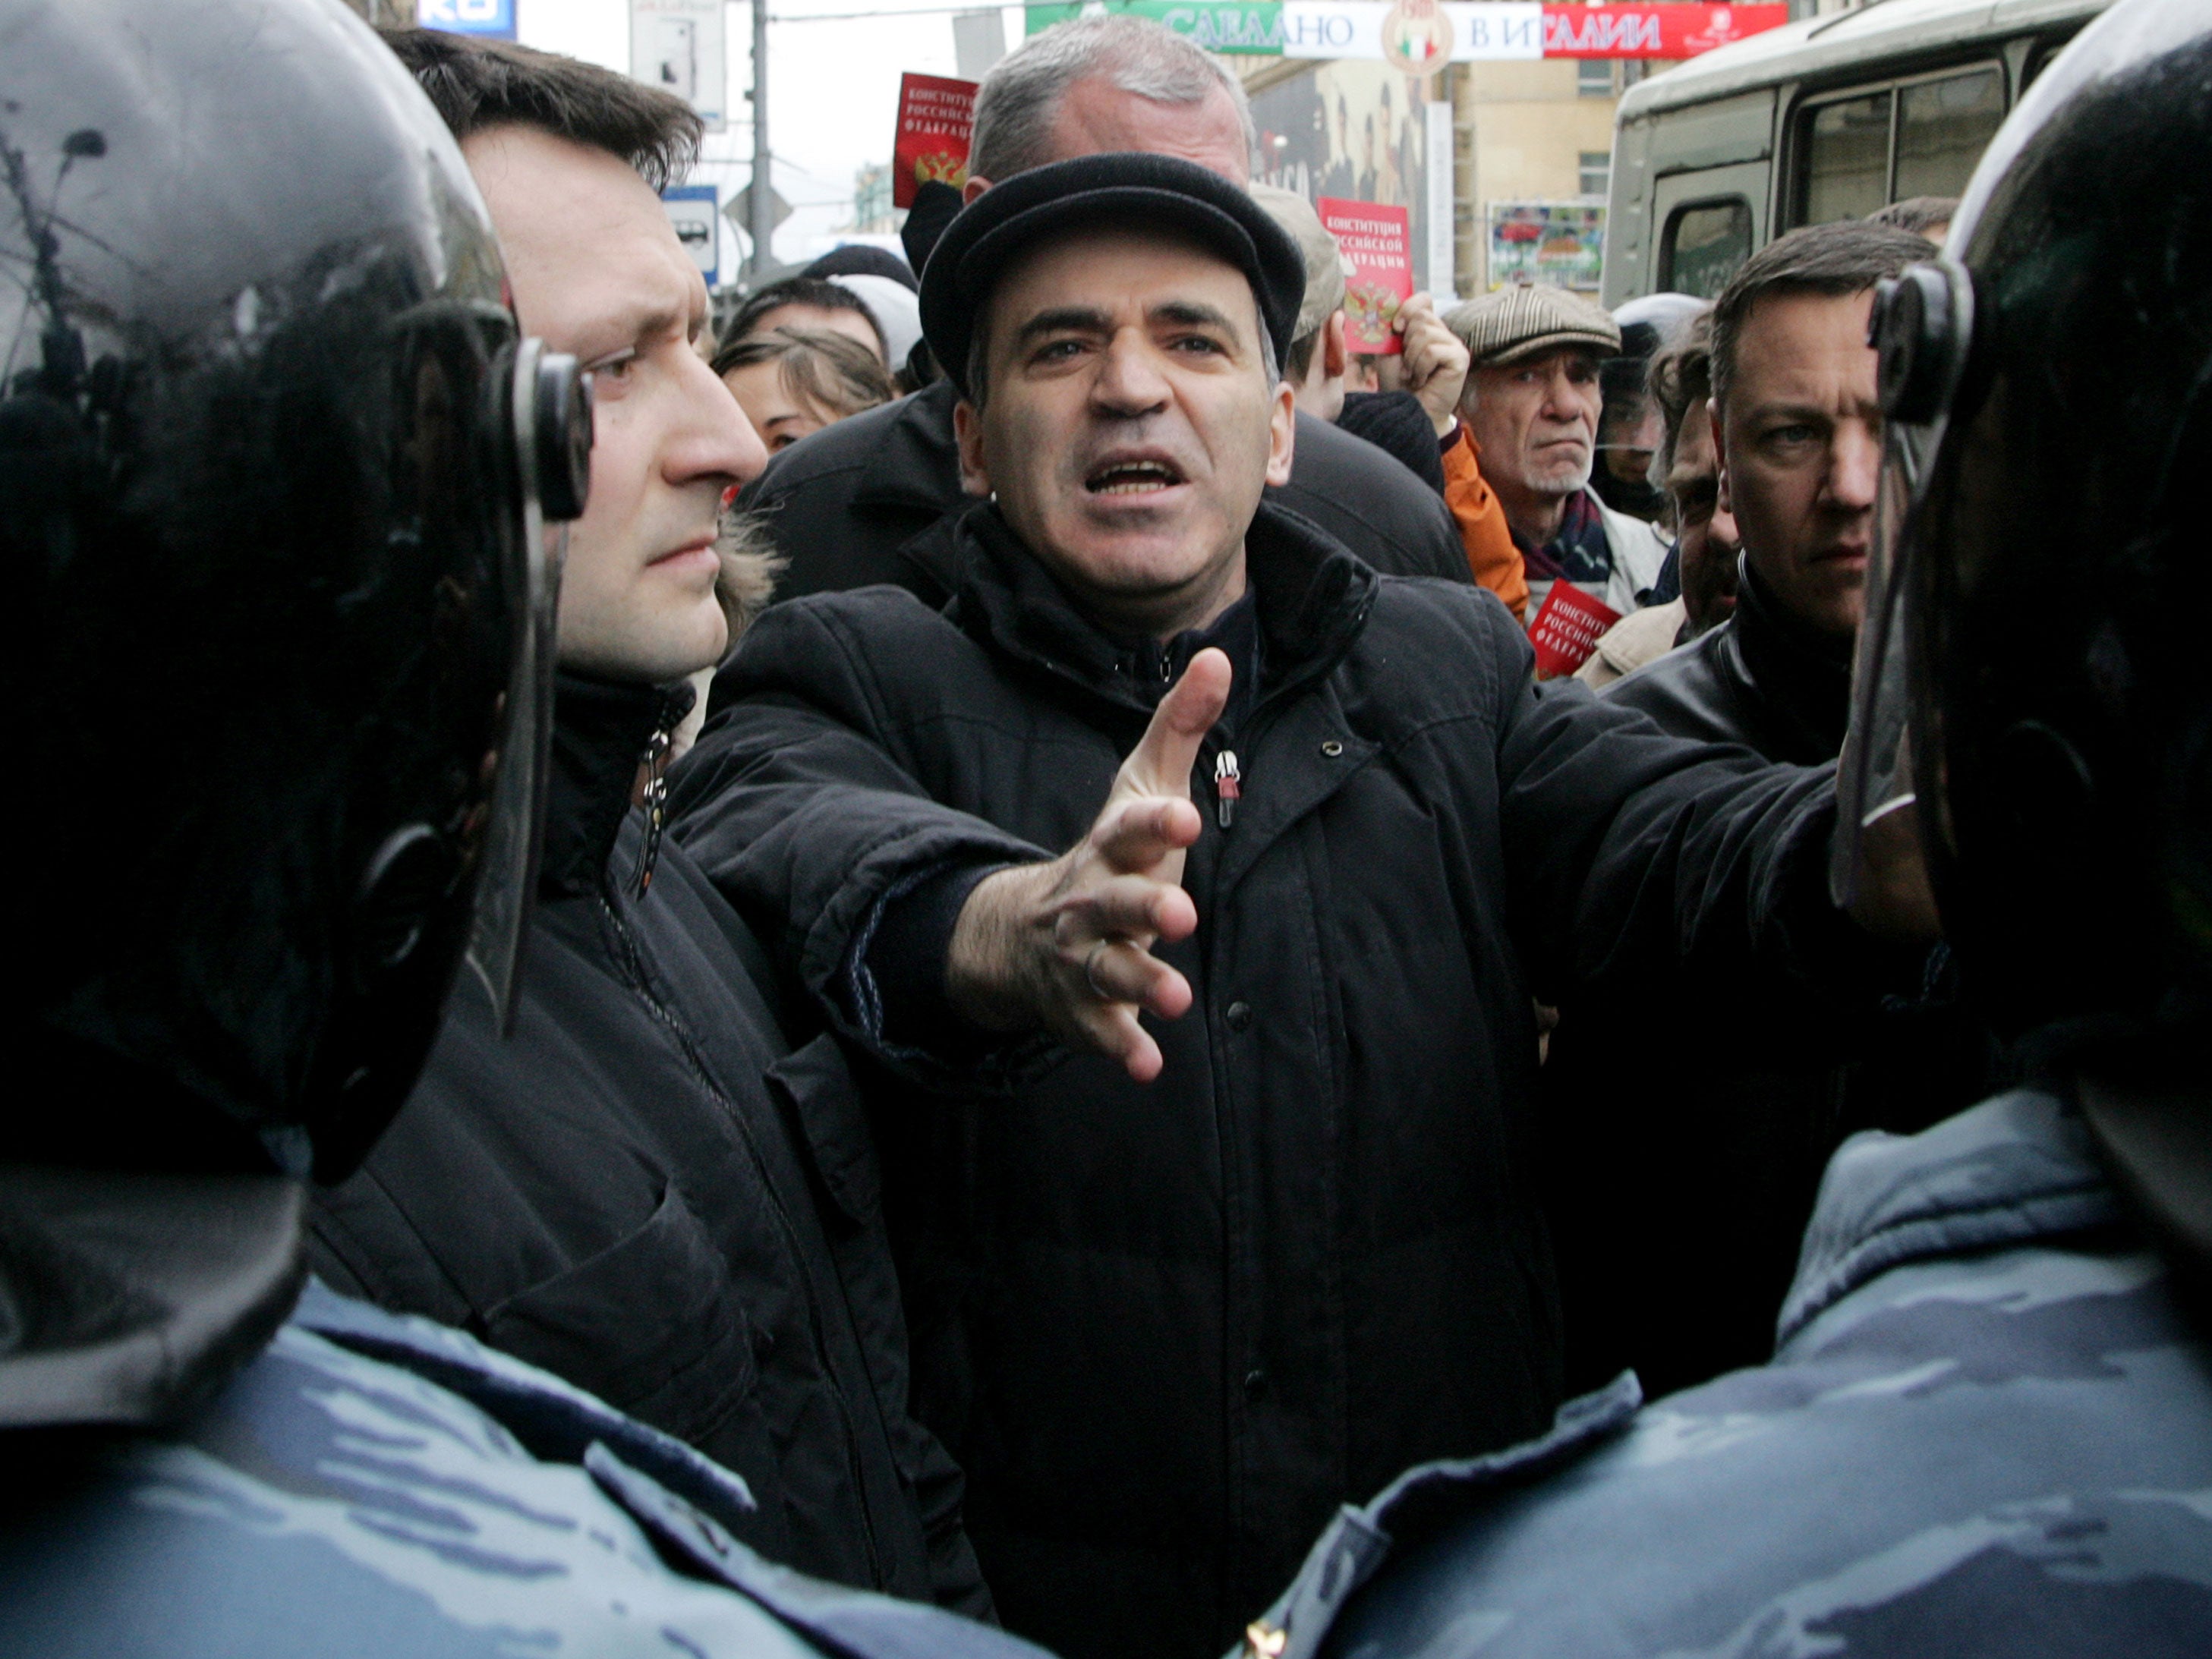 Garry Kasparov gestures to riot police at an anti-Putin march in Moscow in 2007